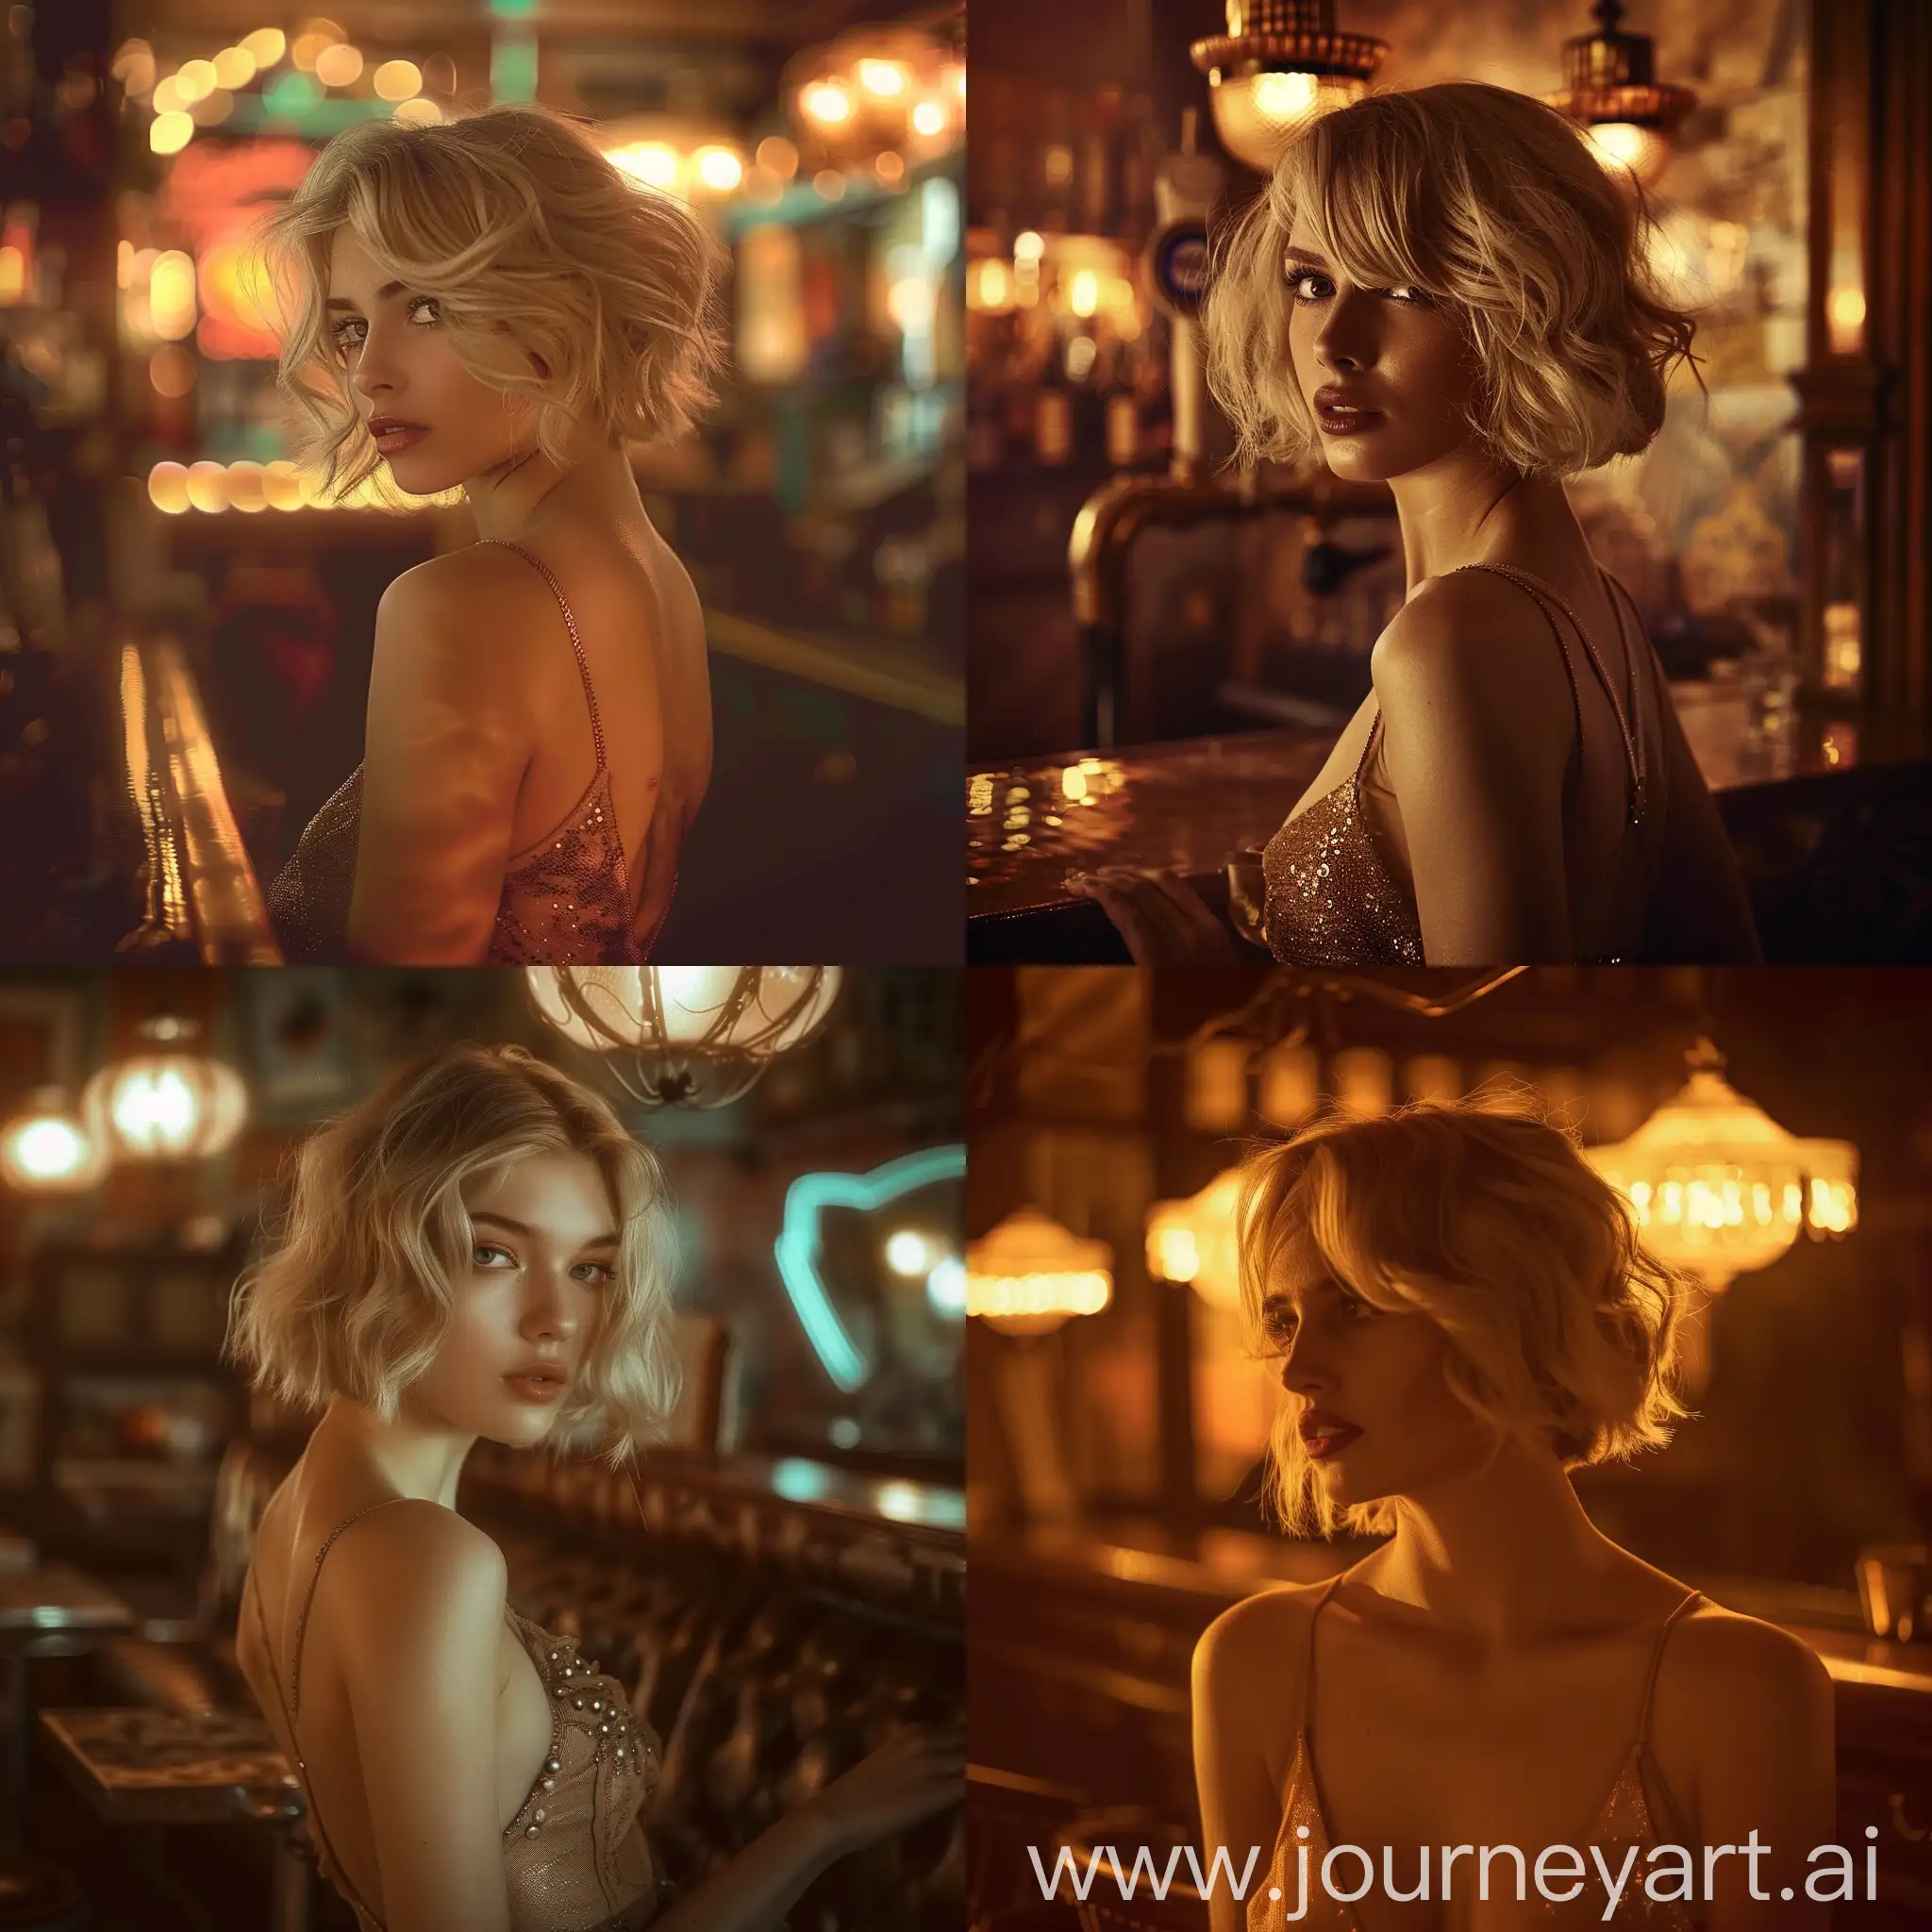 a blonde girl with wavy short hair, wearing a revealing dress, in a retro style bar, vintage ambiance, artistic lighting